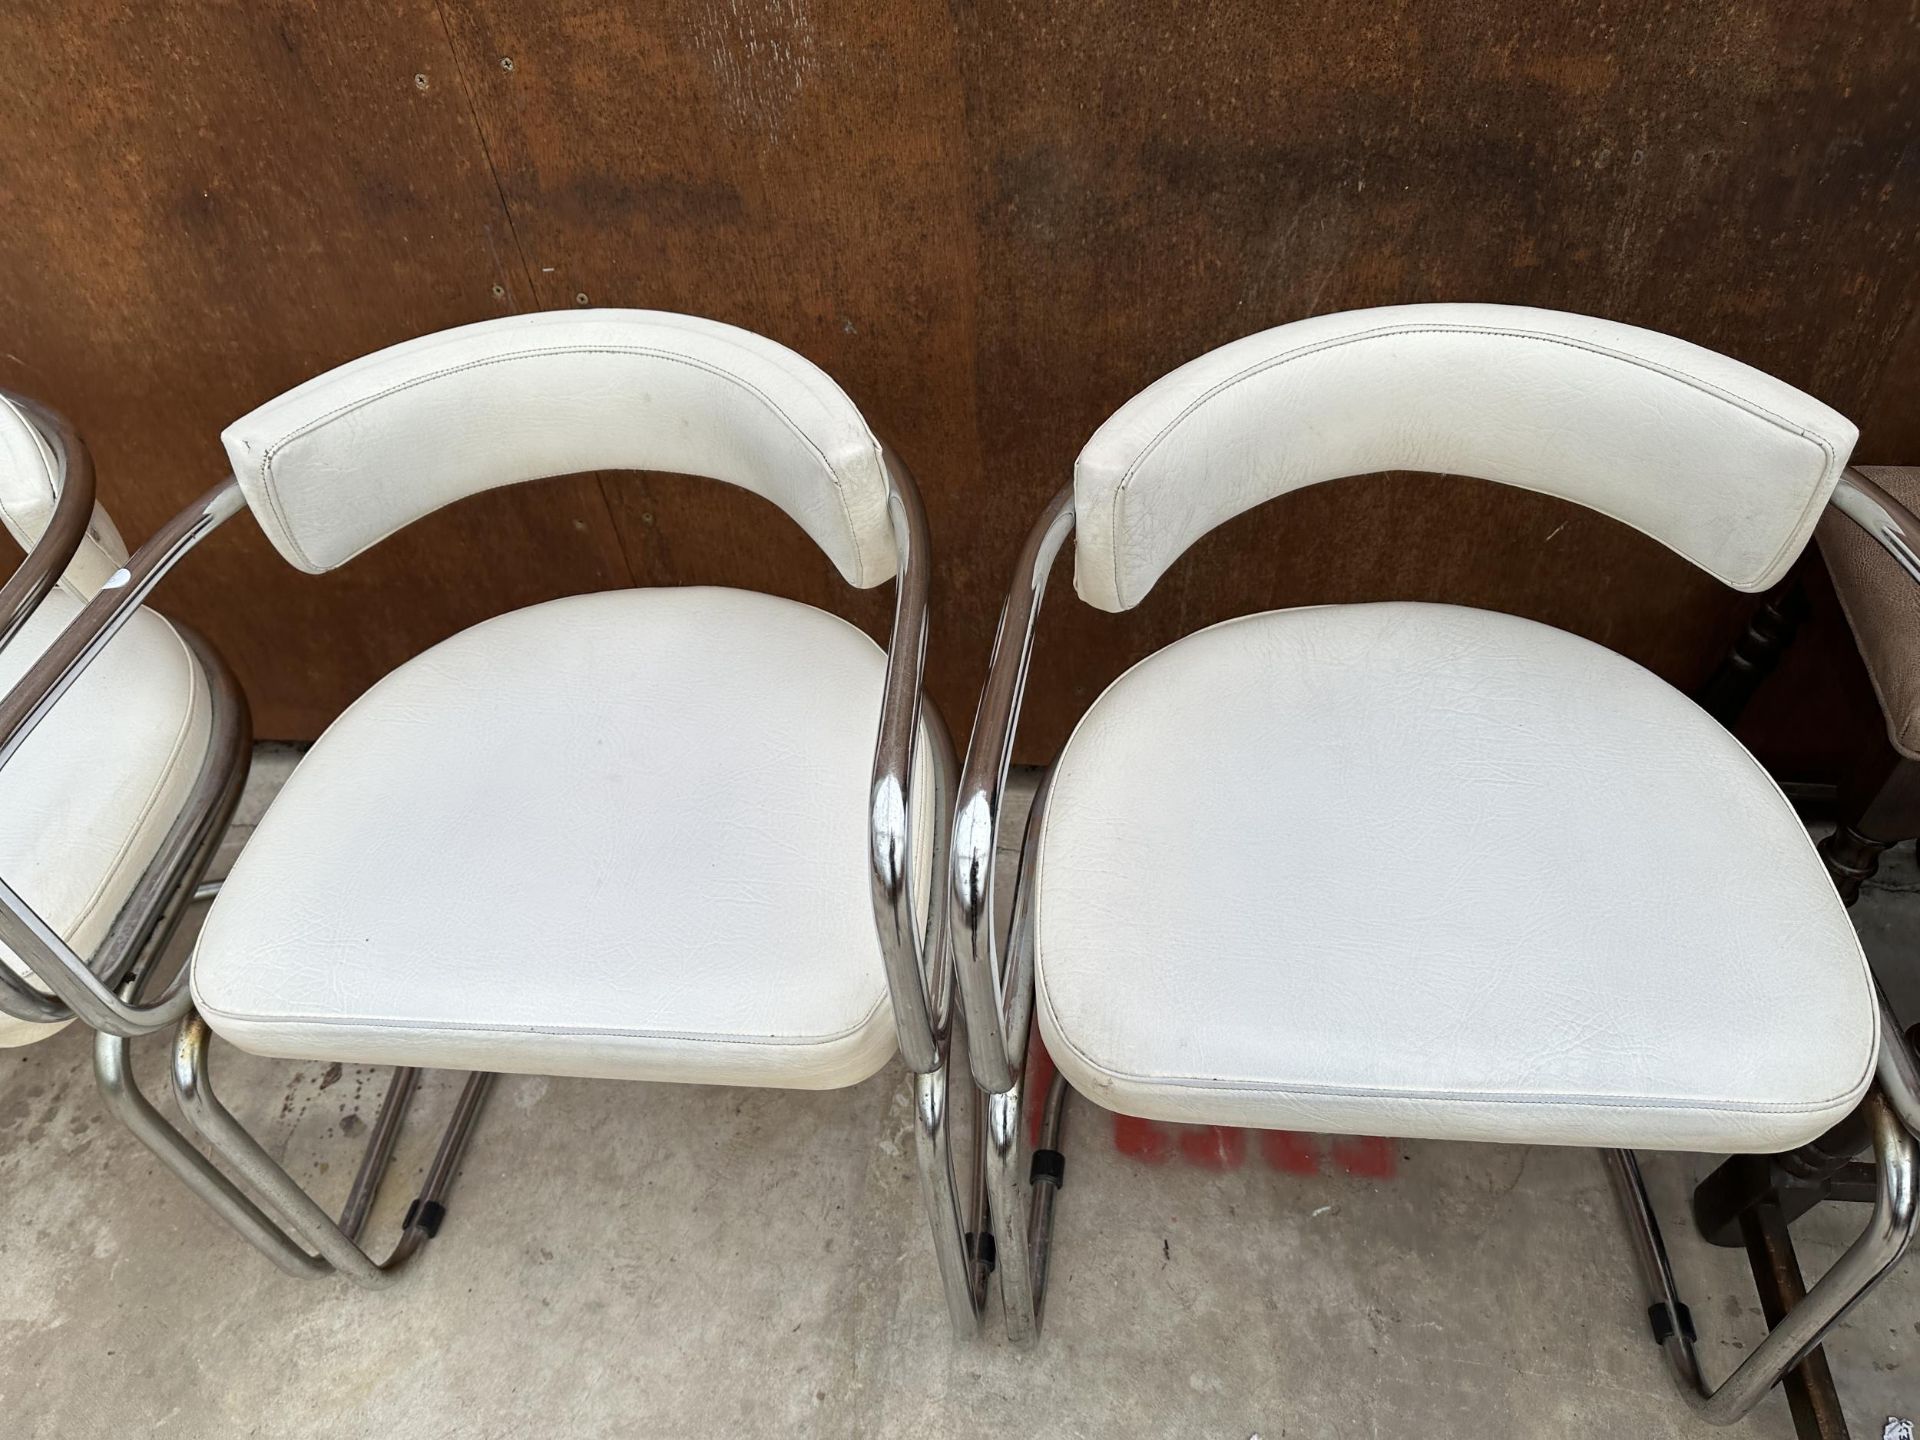 A SET OF FOUR TUBULAR CHROME ELBOW CHAIRS WITH WHITE LEATHER SEATS AND BACKS - Image 2 of 6